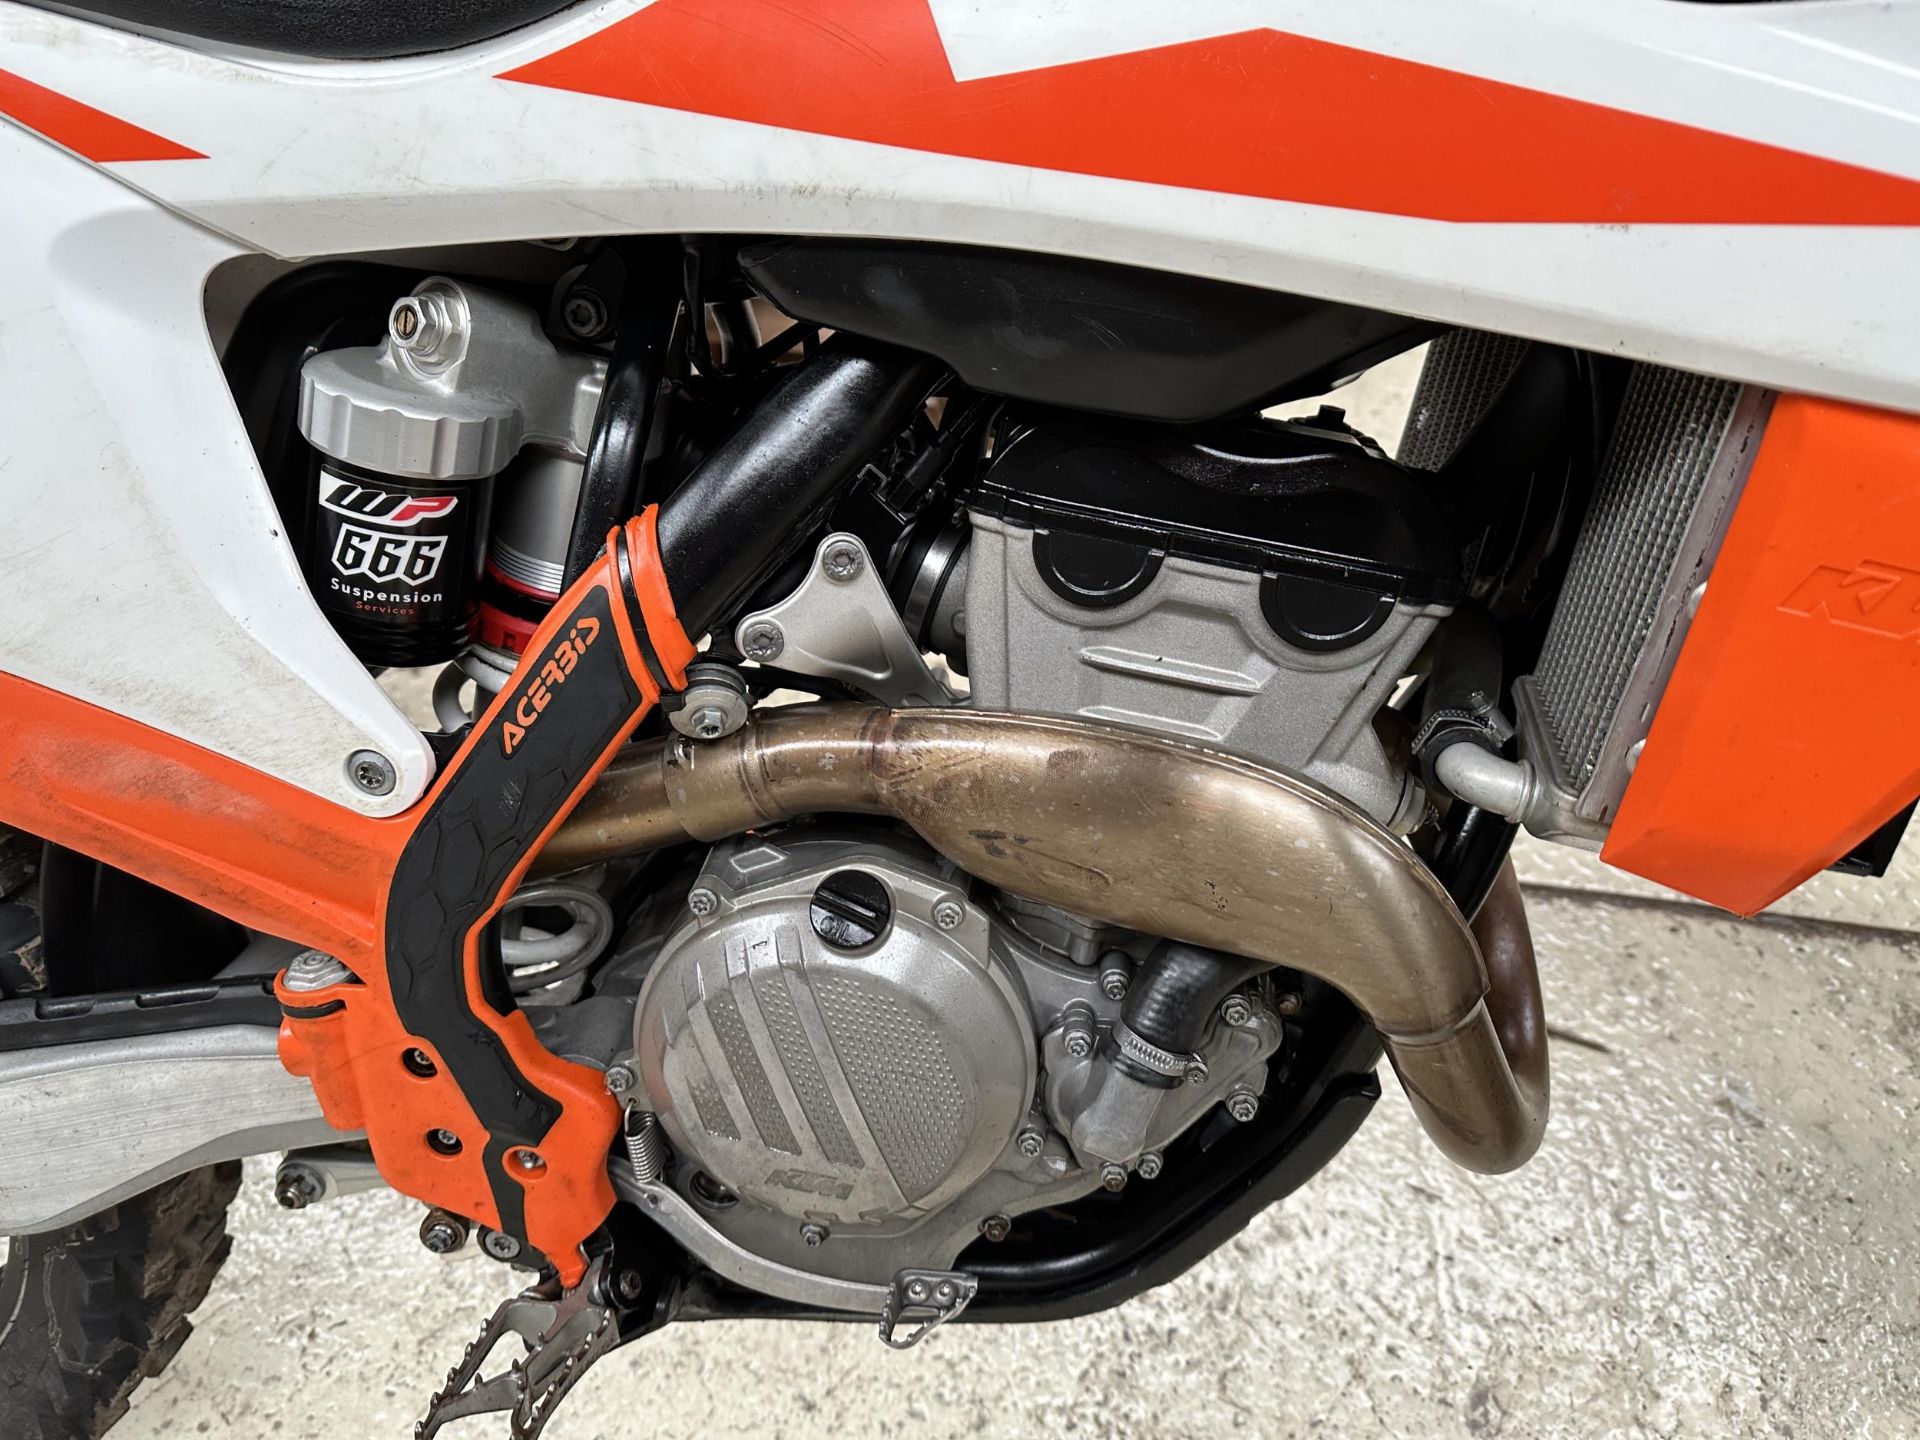 2019 KTM 250 SXF MOTORBIKE 158 HOURS PISTON & CAM CHAIN DONE 40 HOURS AGO. MAP SWITCH BUTTON, - Image 6 of 9